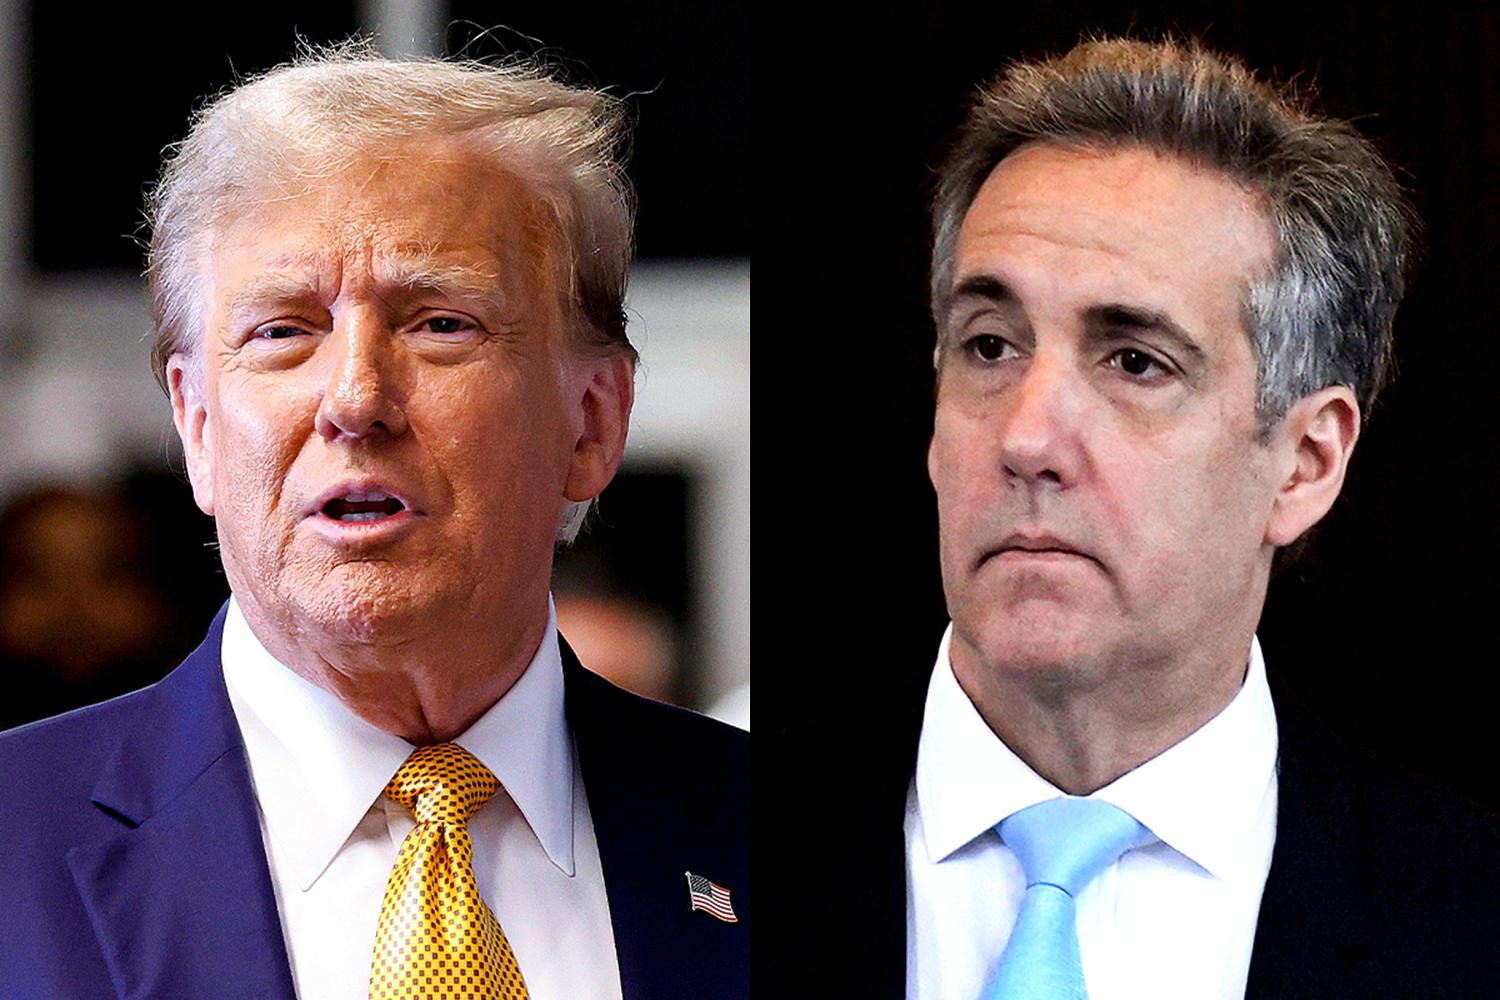 ‘That was a lie!’: Trump’s lawyer gets heated during questioning of former fixer Michael Cohen